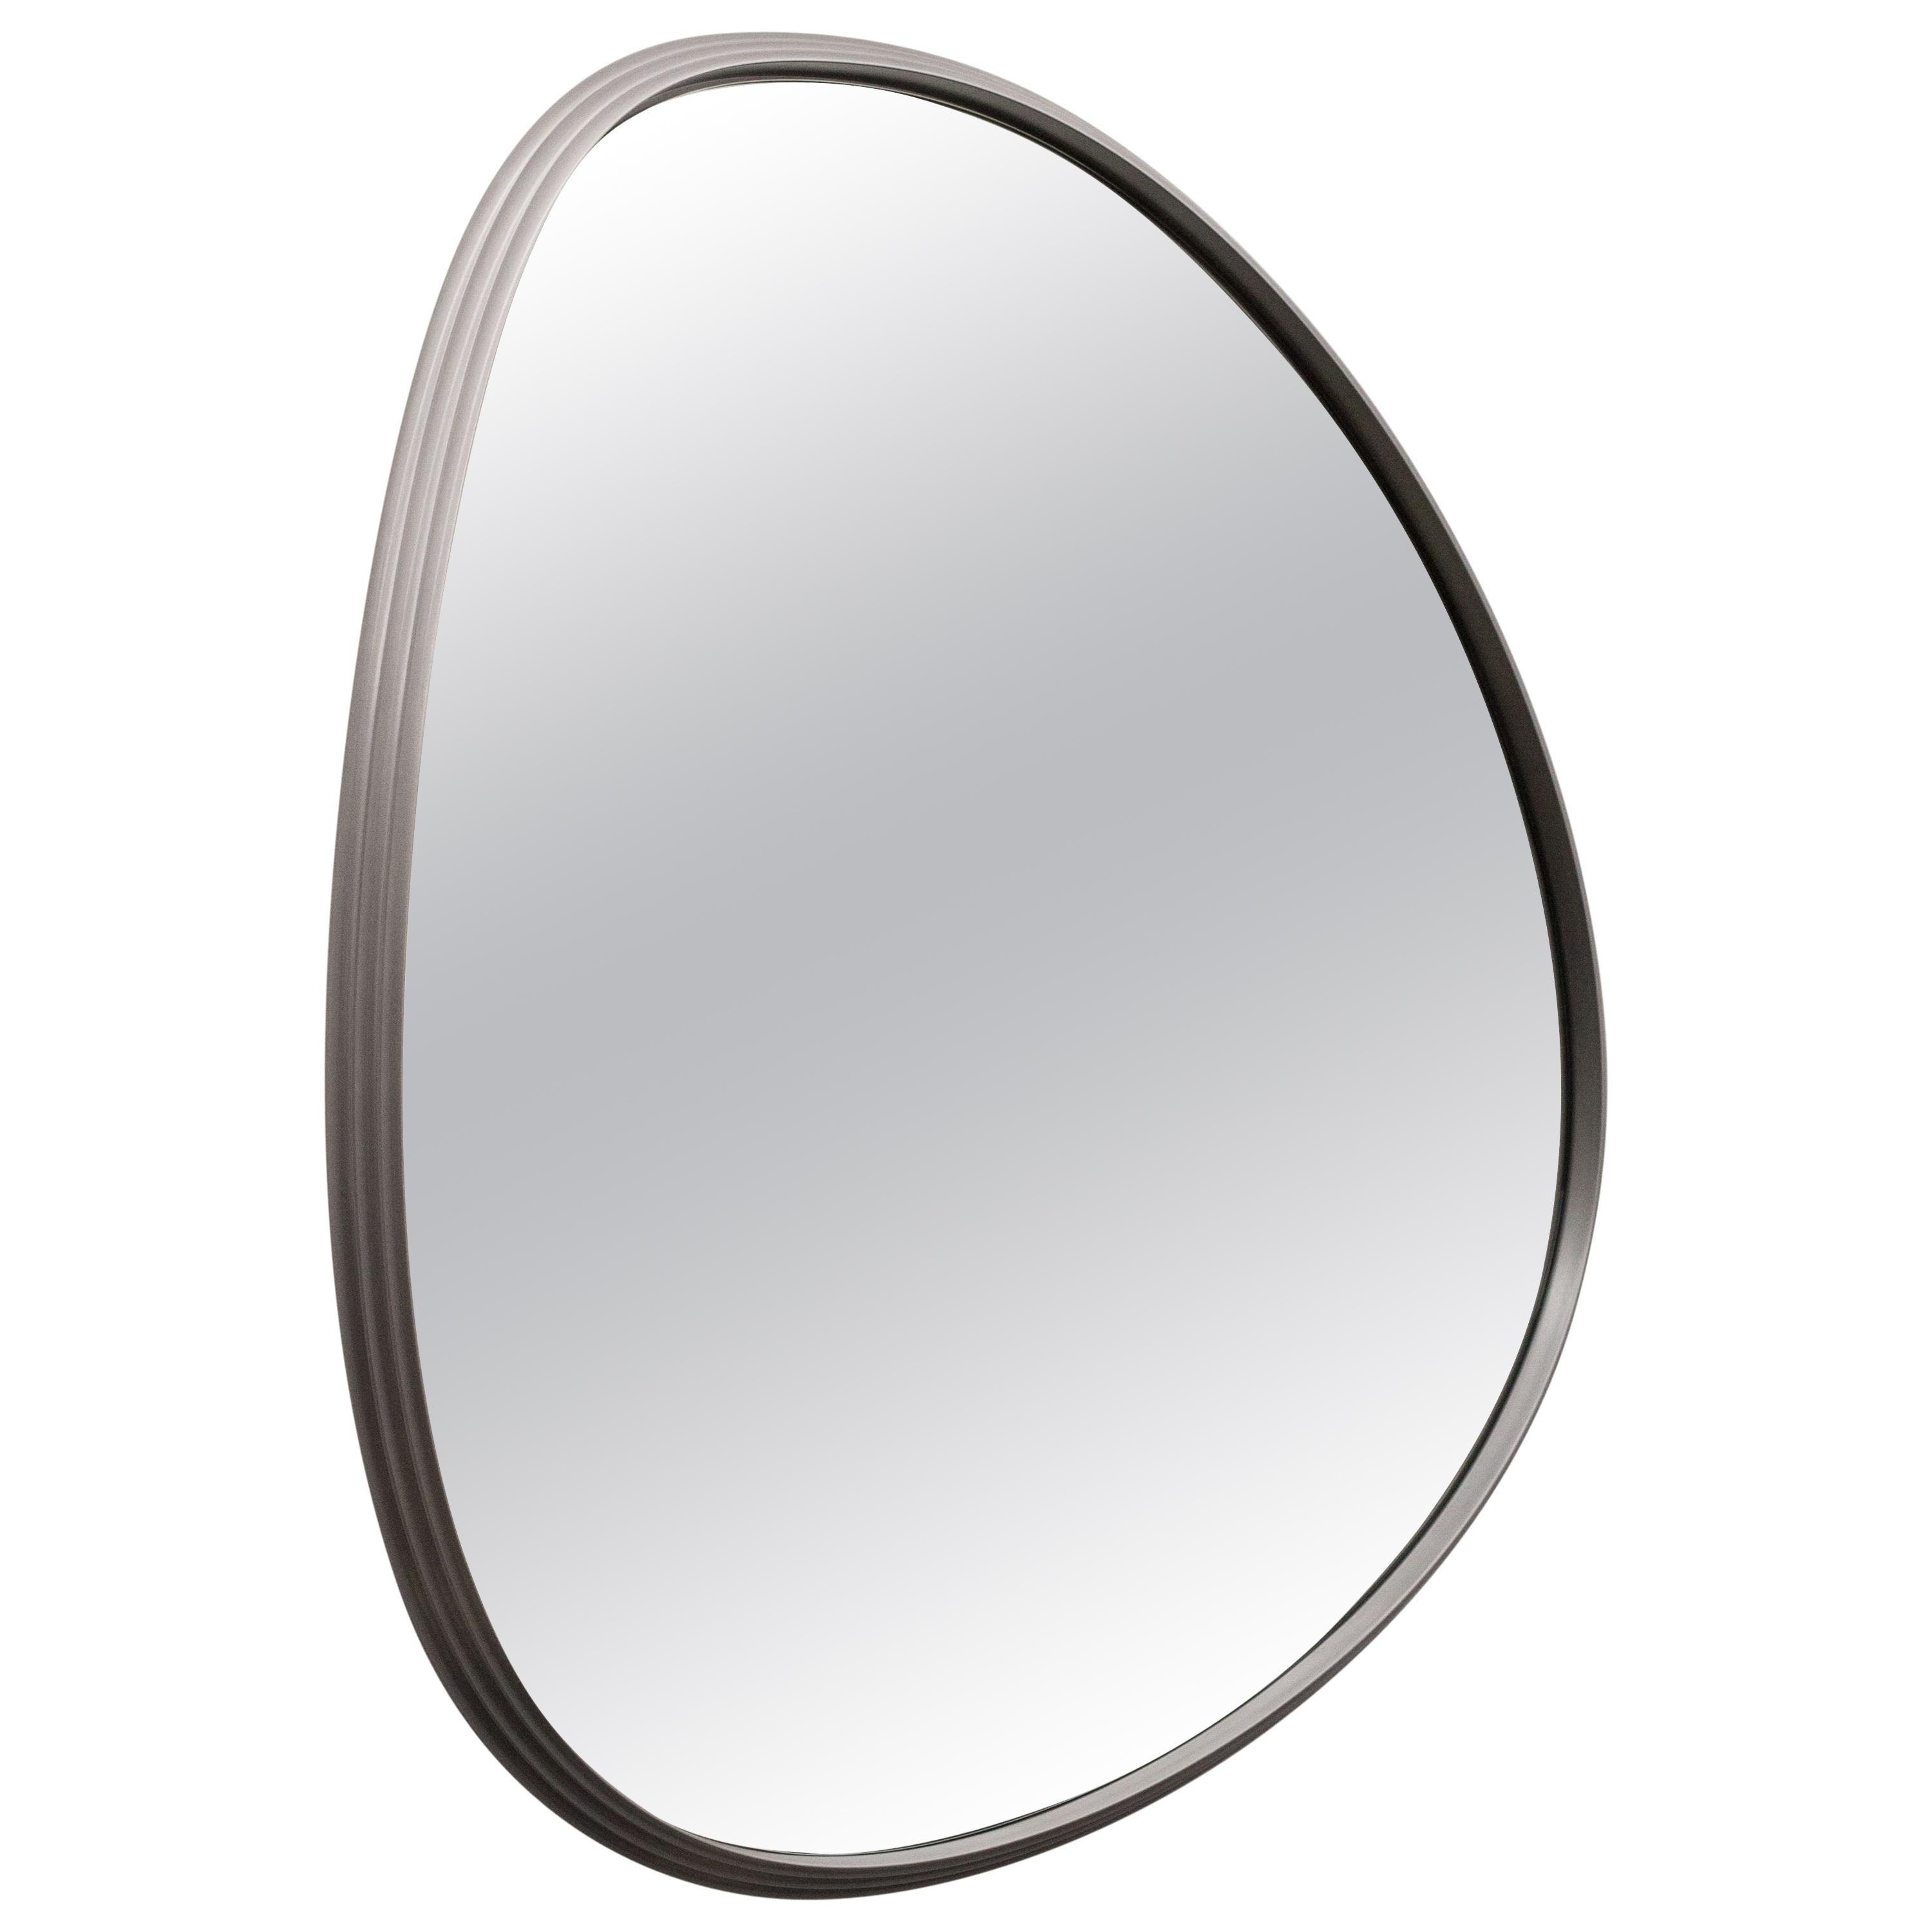 Sweep Wall Mirror in Brushed Aluminum